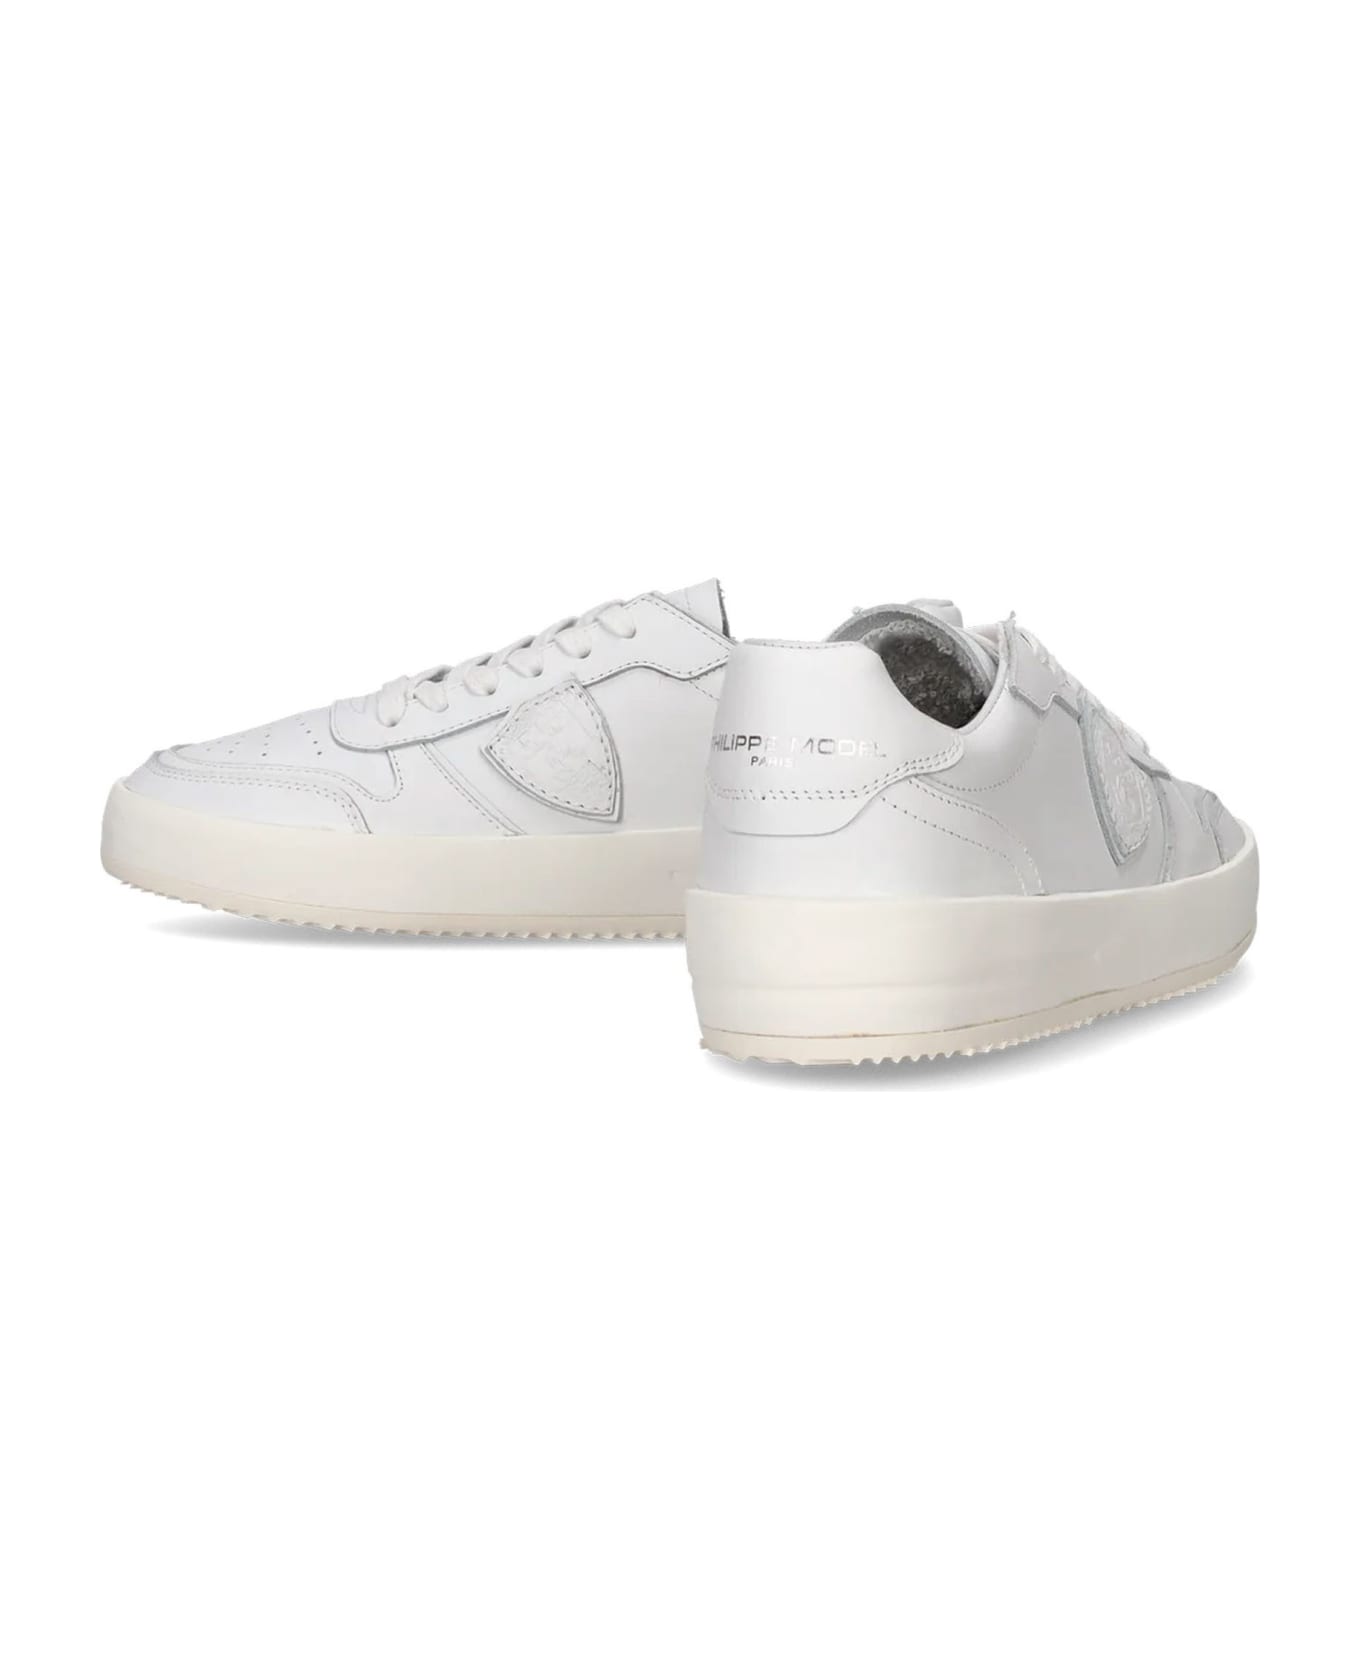 Philippe Model Nice Low-top Sneakers In Leather, White - White